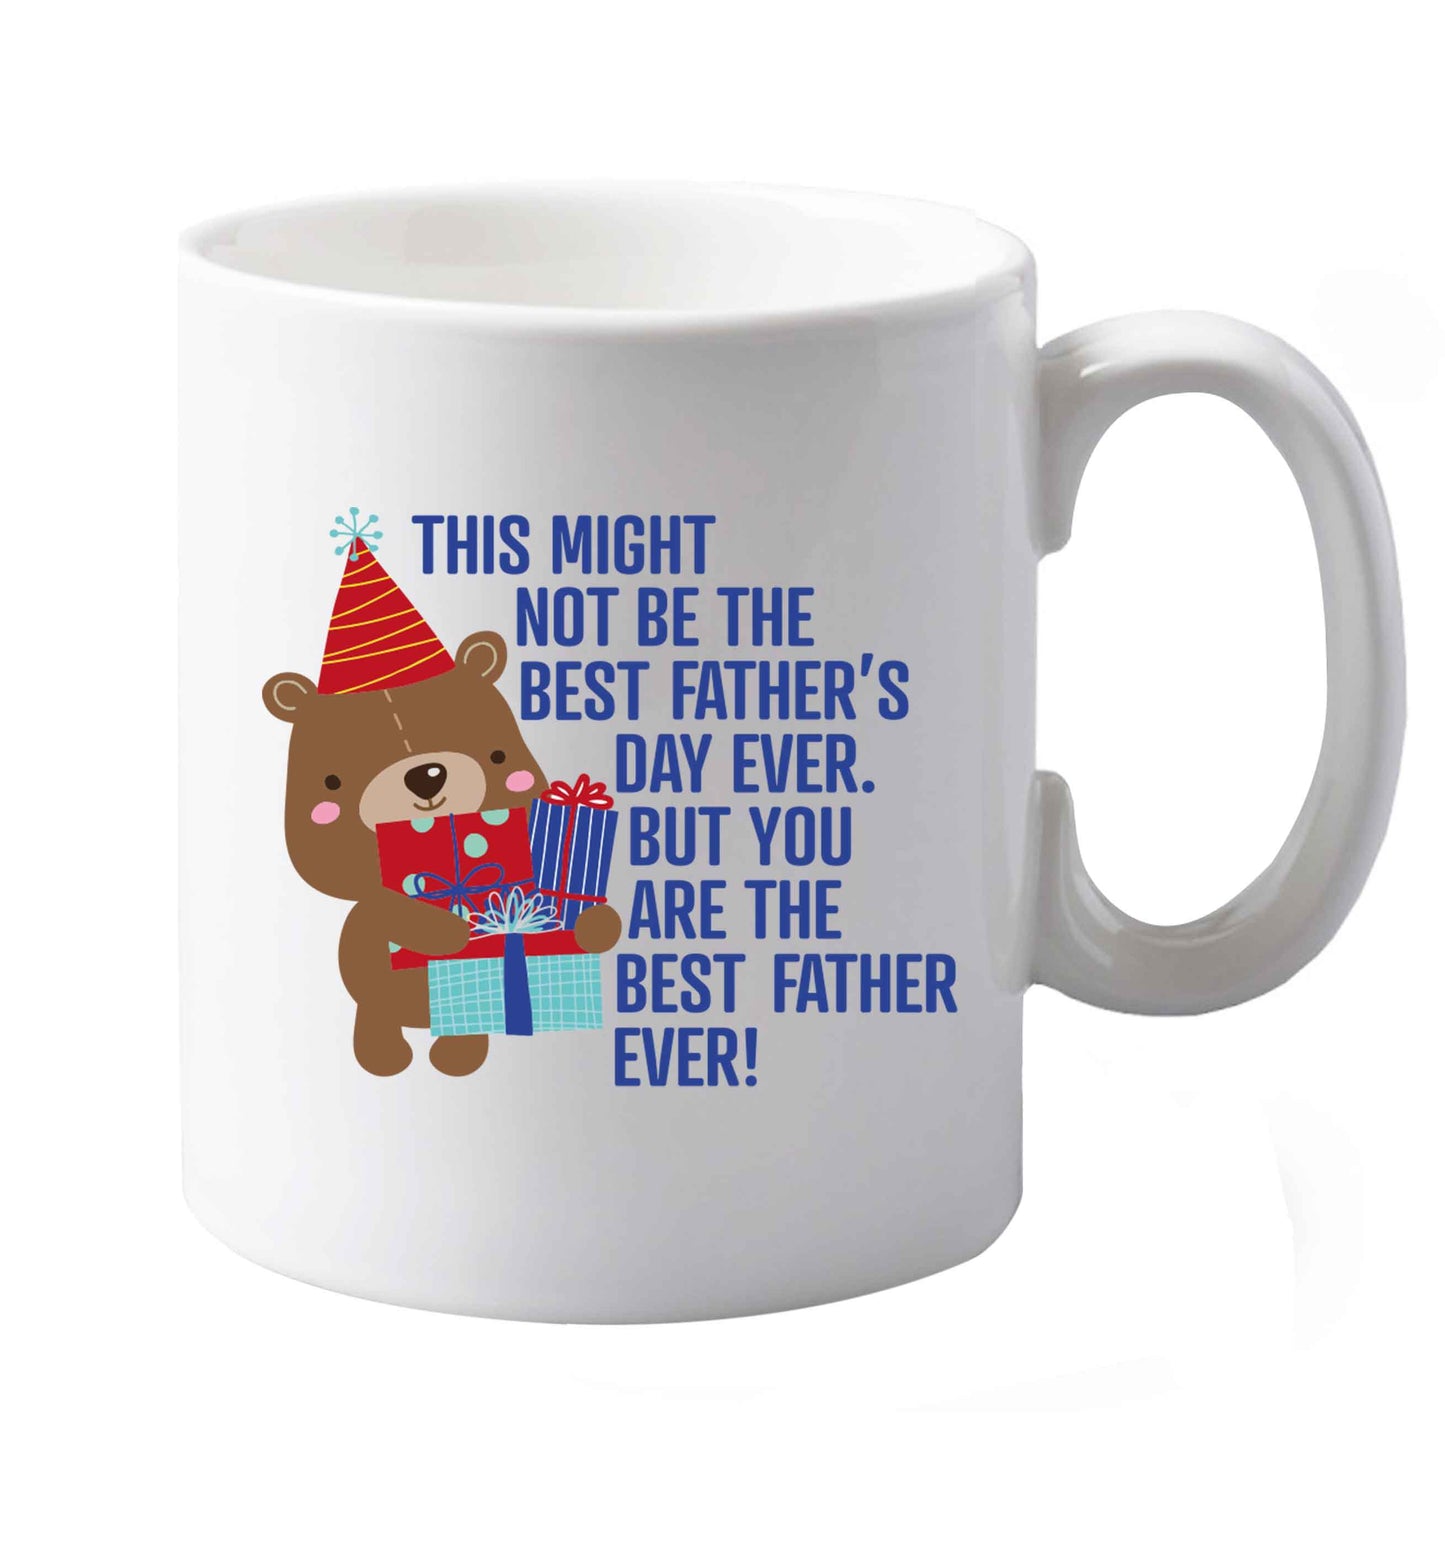 10 oz It might not be the best Father's Day ever but you are the best father ever! ceramic mug both sides